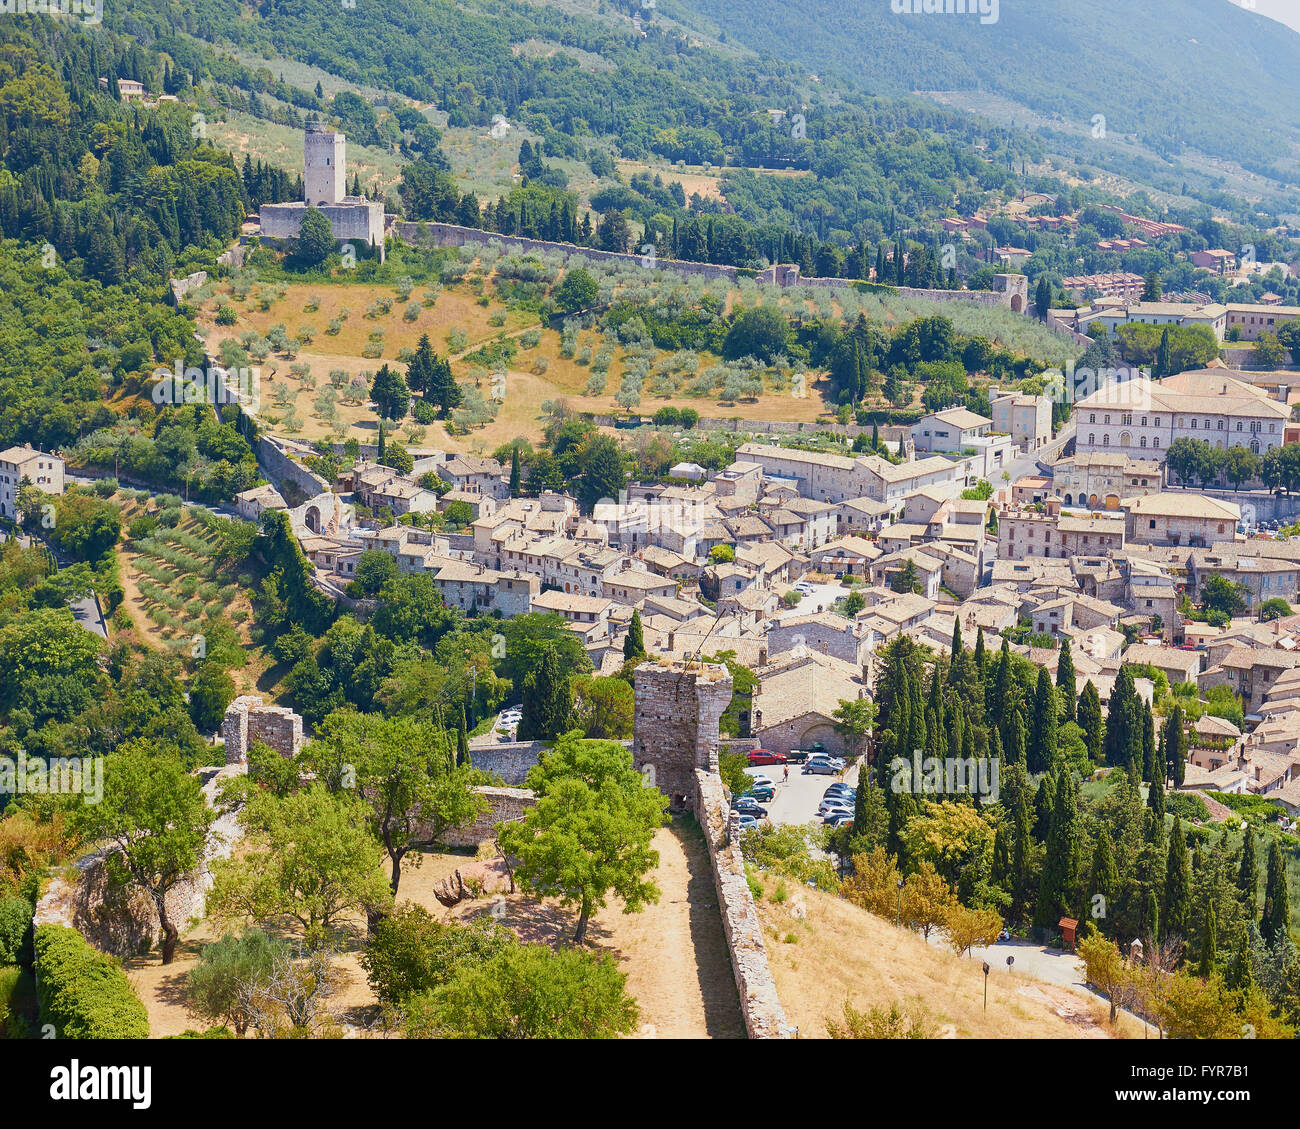 Walled town of Assisi from above Umbria Italy Europe Stock Photo